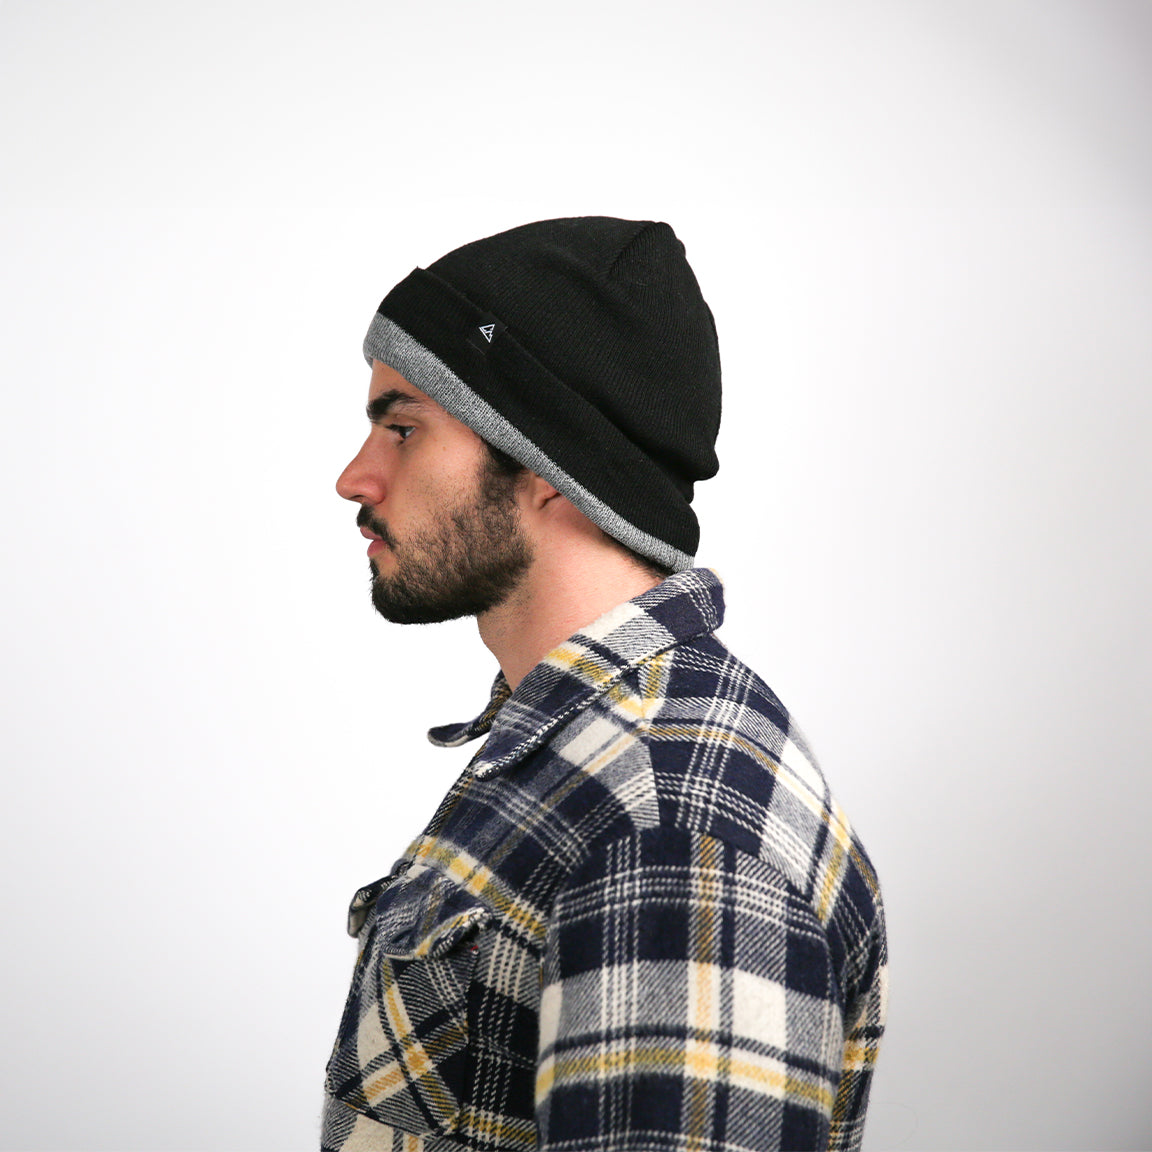 A side profile, the man's beanie, now seen from a different angle, reveals a layered, slouchy style. The same plaid shirt cloaks his upper body, and his facial features are in profile, with the light casting soft shadows on his face, accentuating his jawline and the intensity of his gaze to the side.